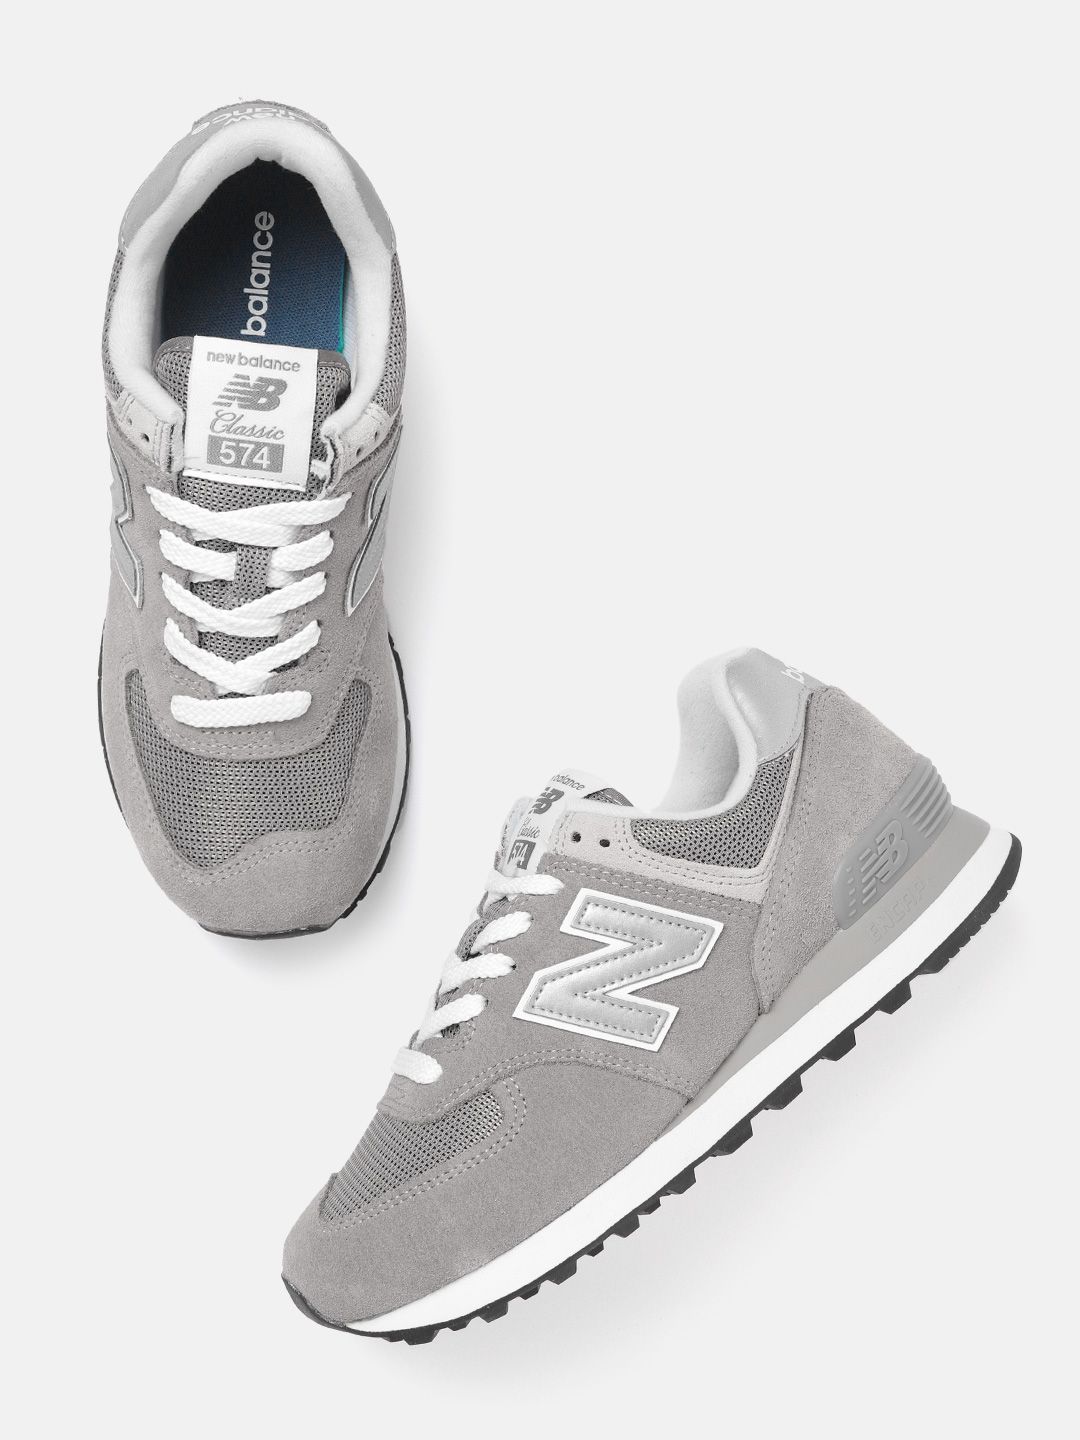 New Balance Women Grey Woven Design Suede Sneakers Excluding Trims Price in India